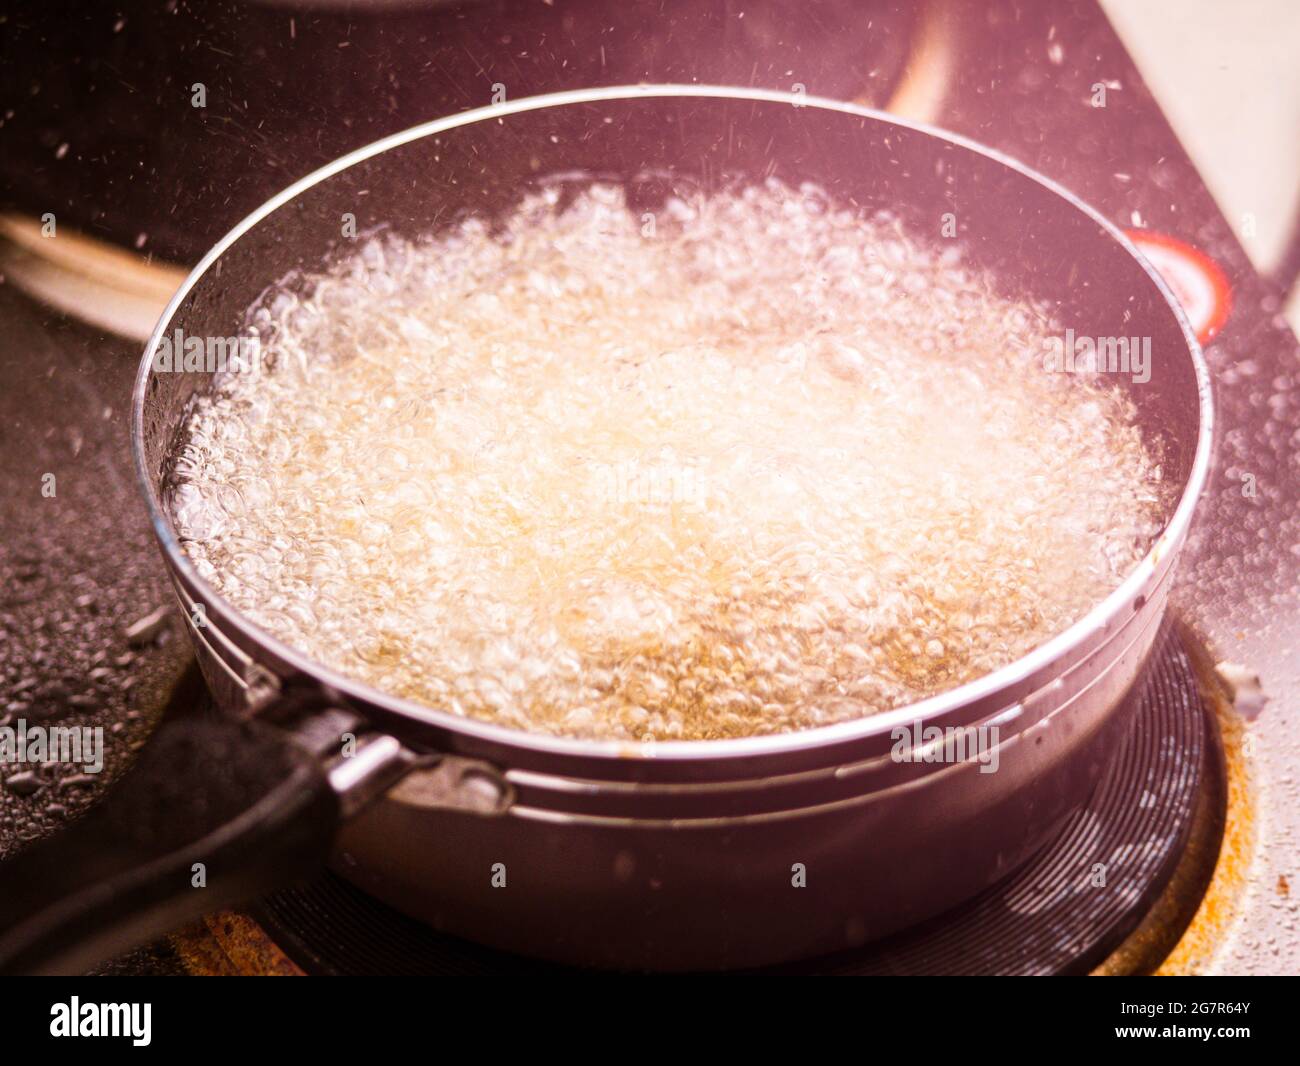 Close up of Frying french fries in the fryer in hot oil on the electric stove in the kitchen. Making homemade french fries. Stock Photo